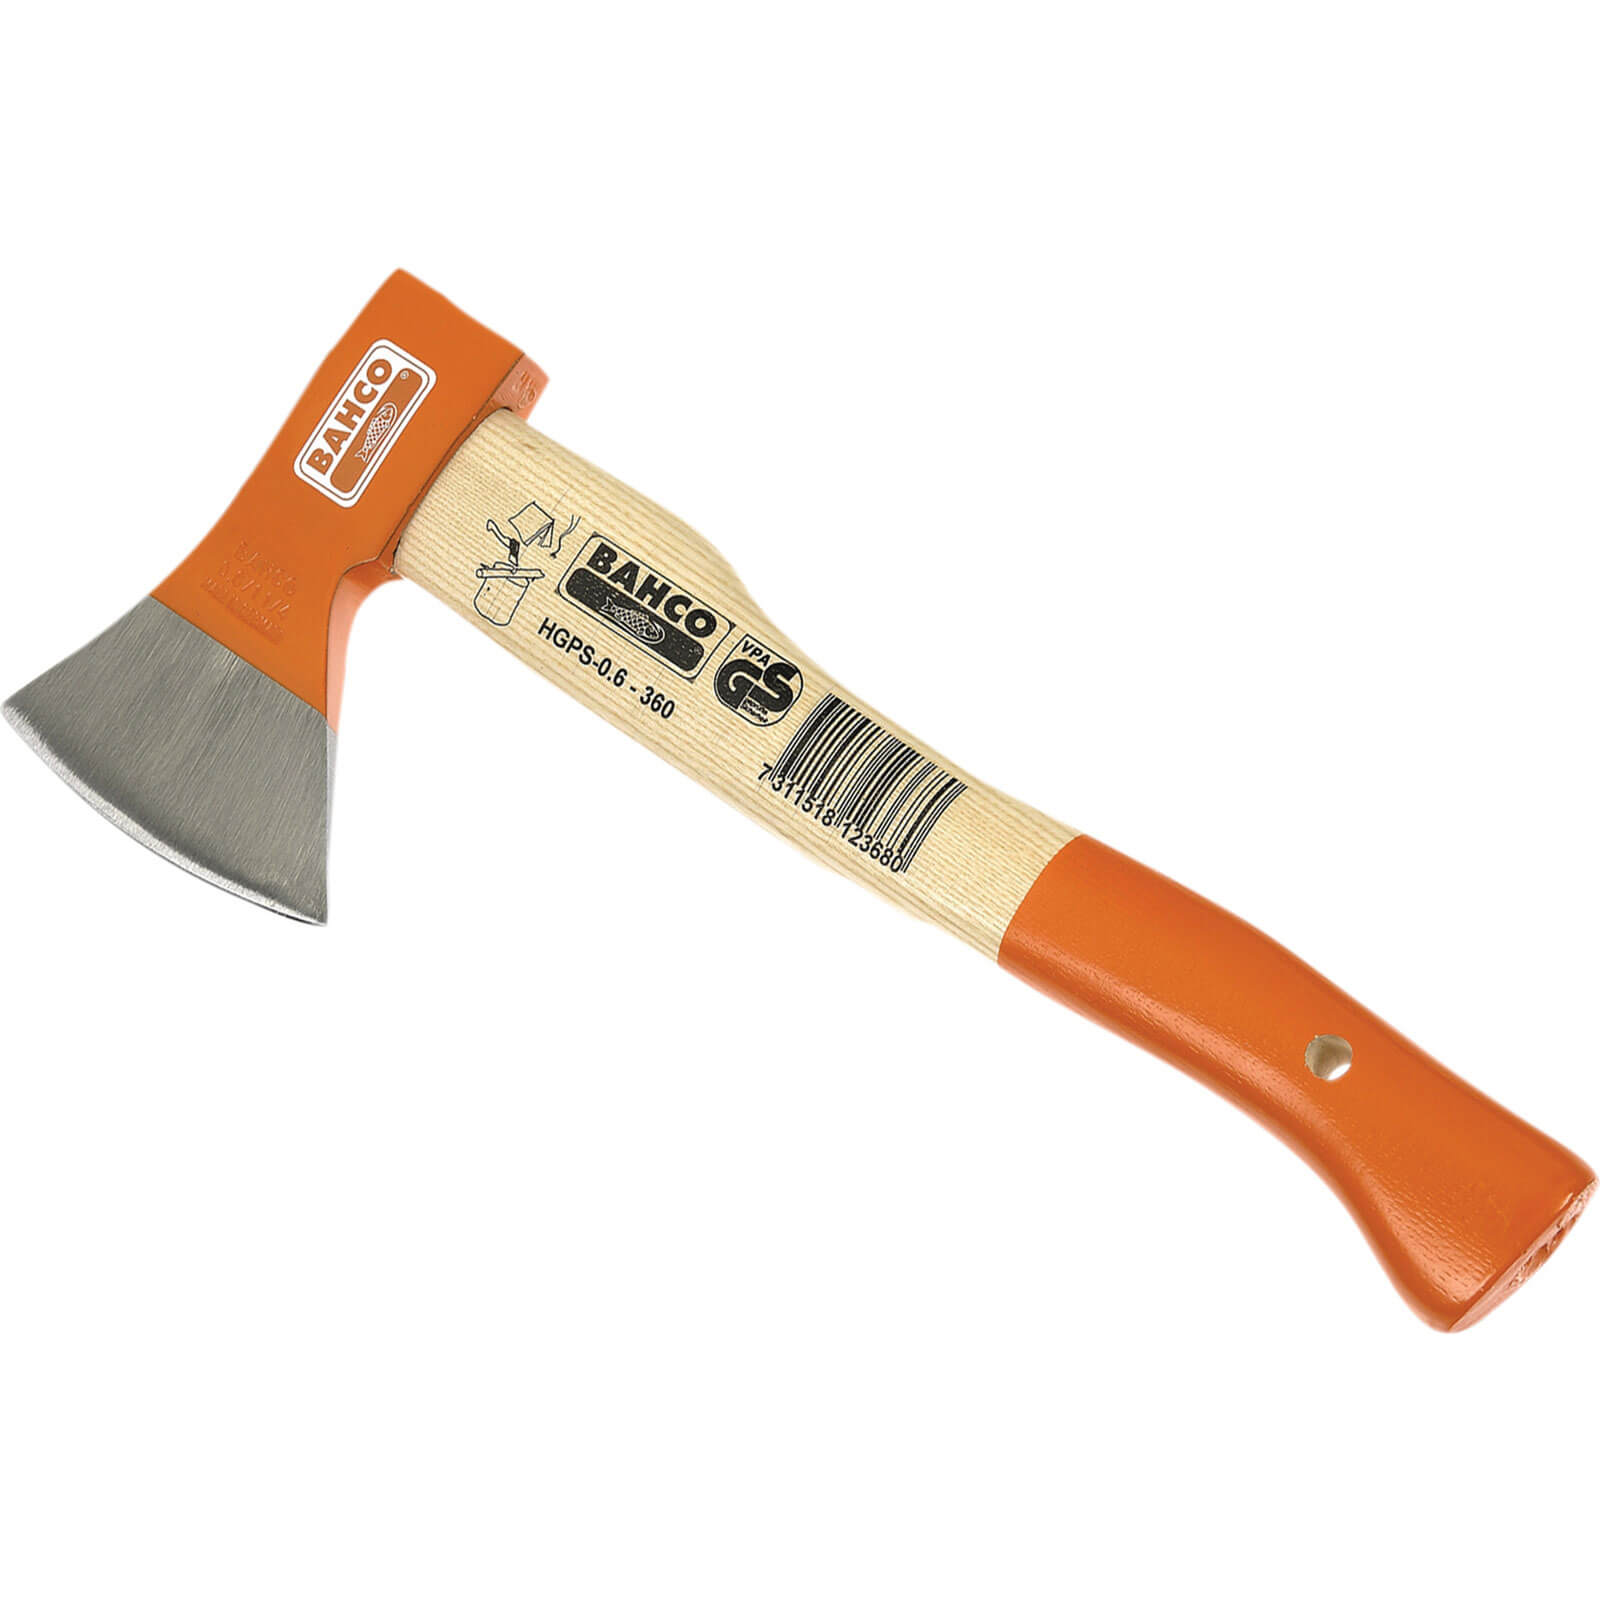 Bahco Standard Axe 380mm 0.8Kg